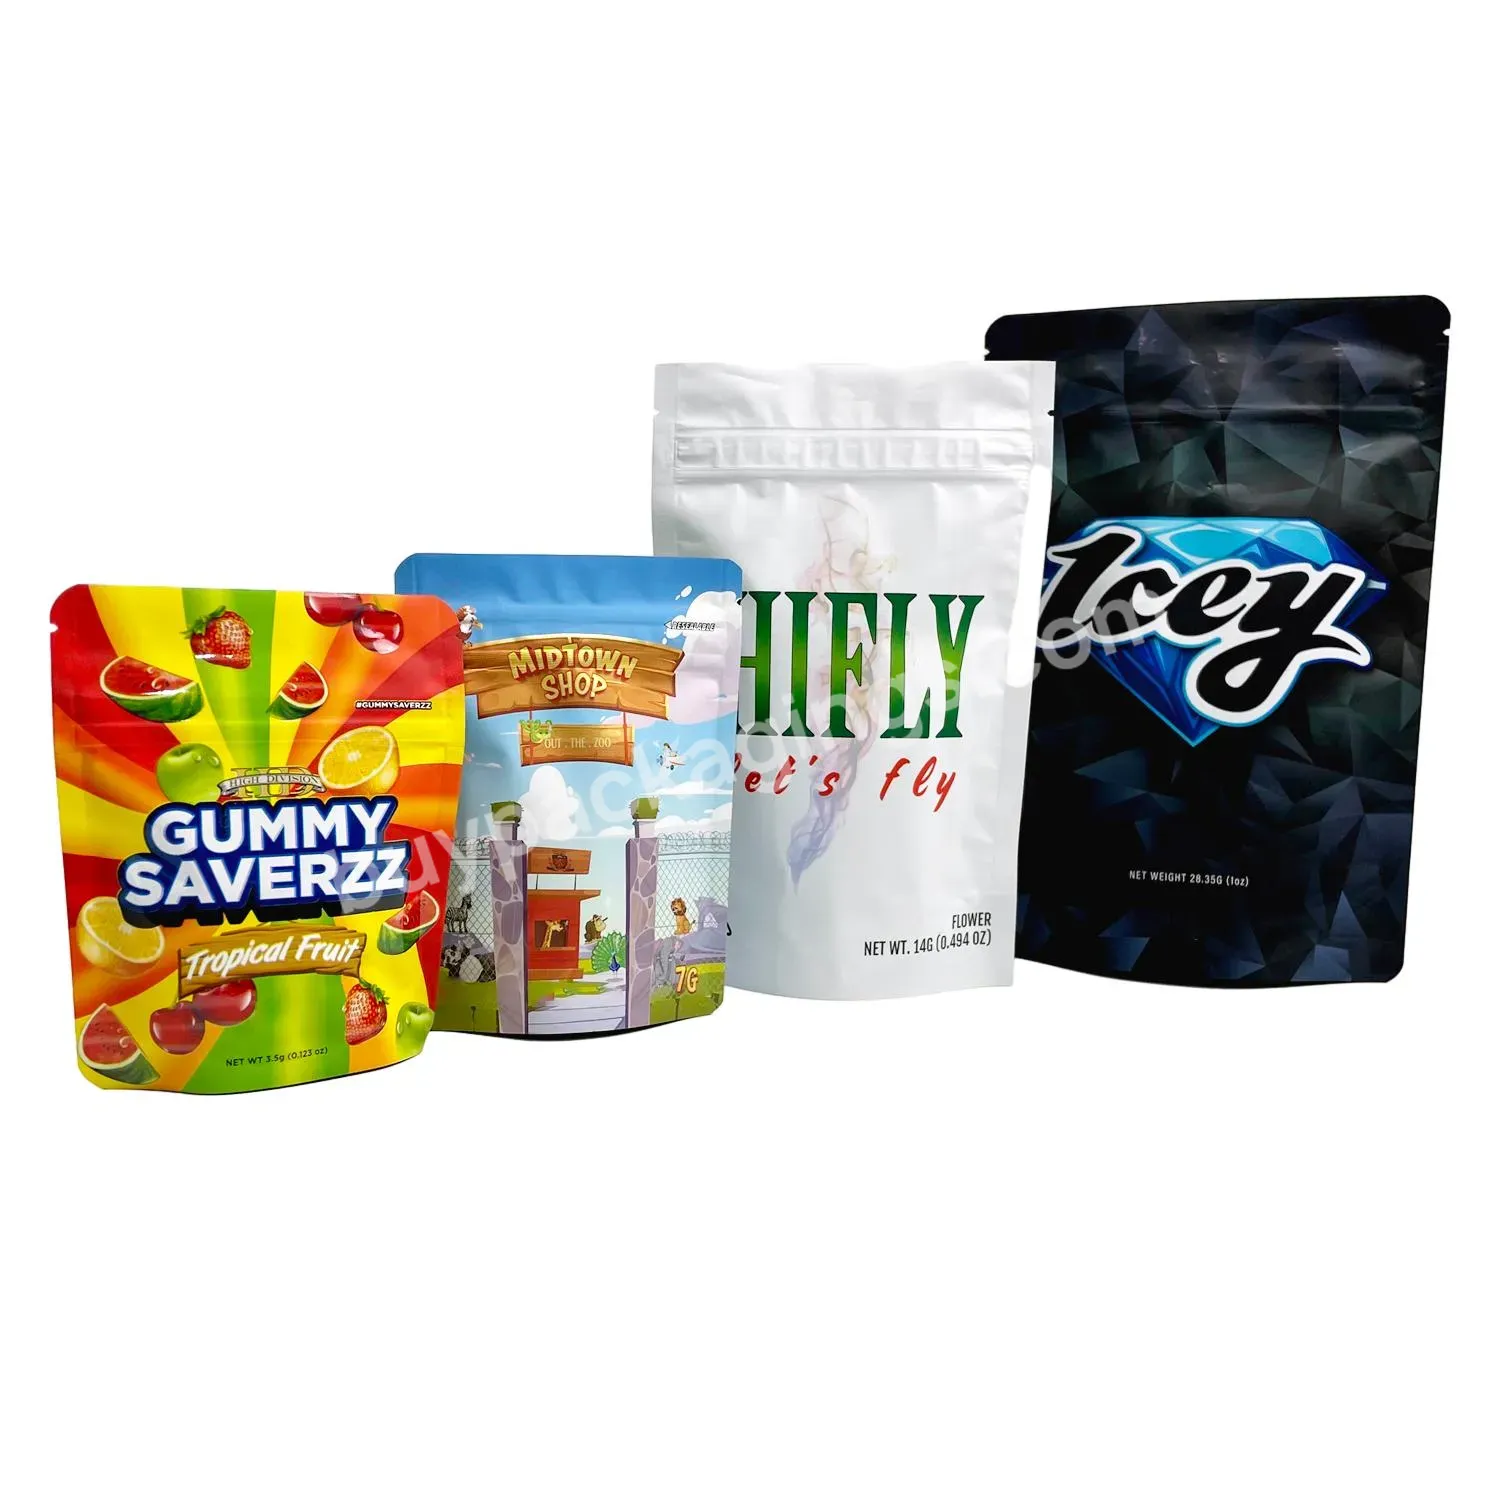 Custom Printed Food Ziplock Bag Stand Up Zip Pouch Product Package Edibles Candy Cali Packs 3.5g Smellproof Bag